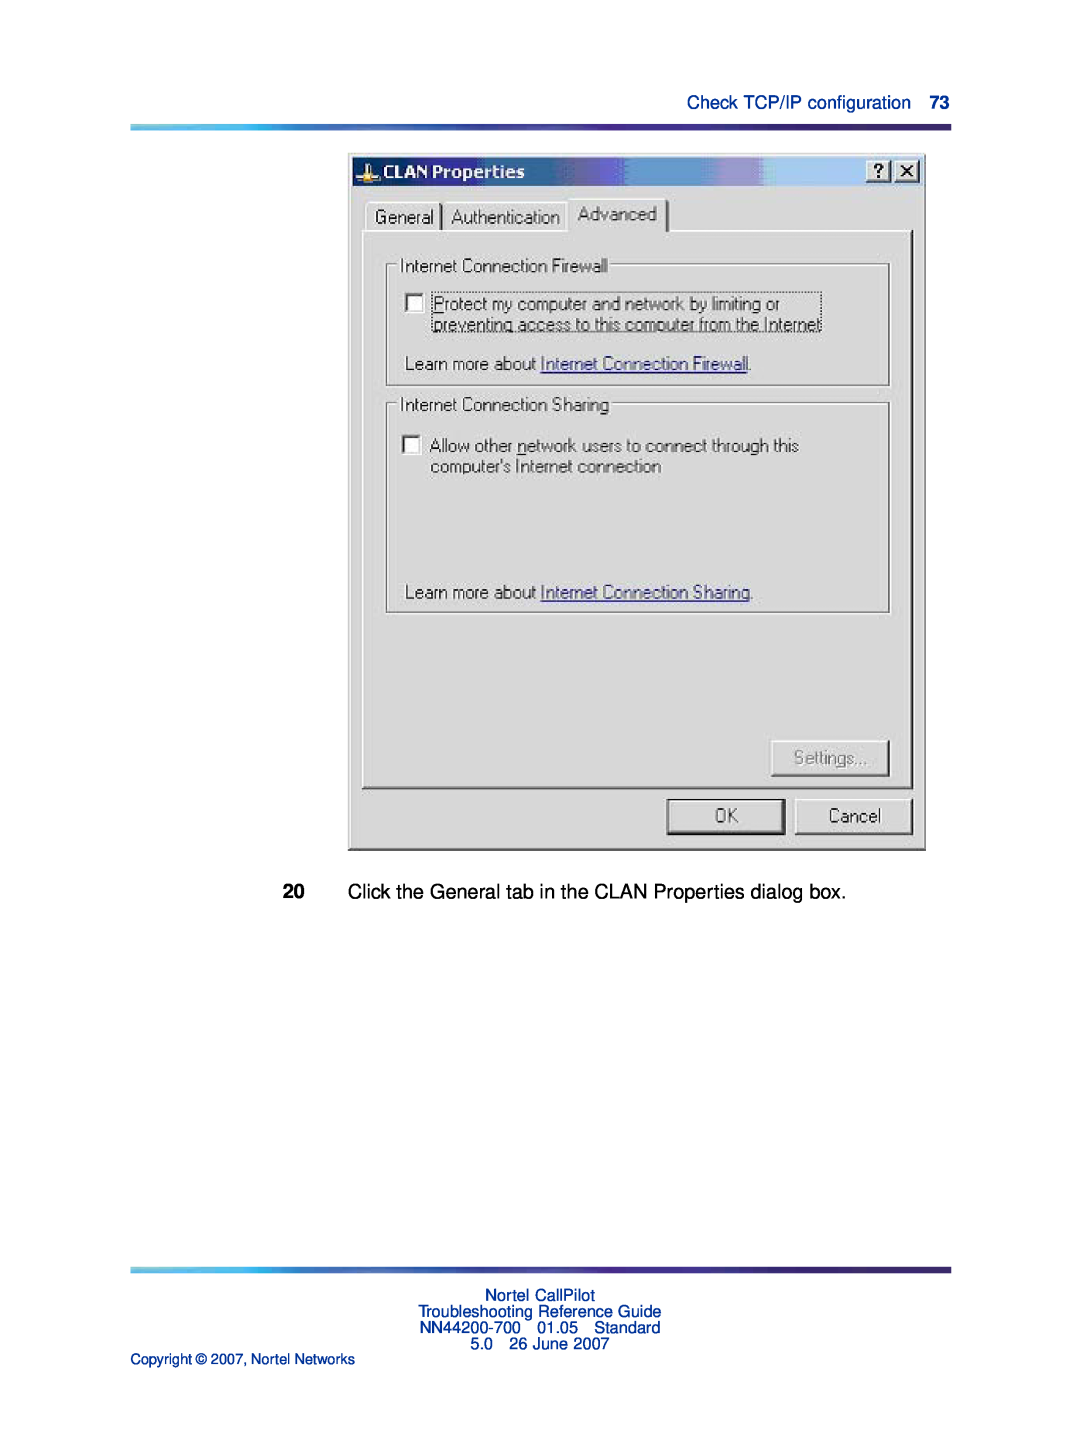 Nortel Networks NN44200-700 manual Click the General tab in the CLAN Properties dialog box, Check TCP/IP conﬁguration 